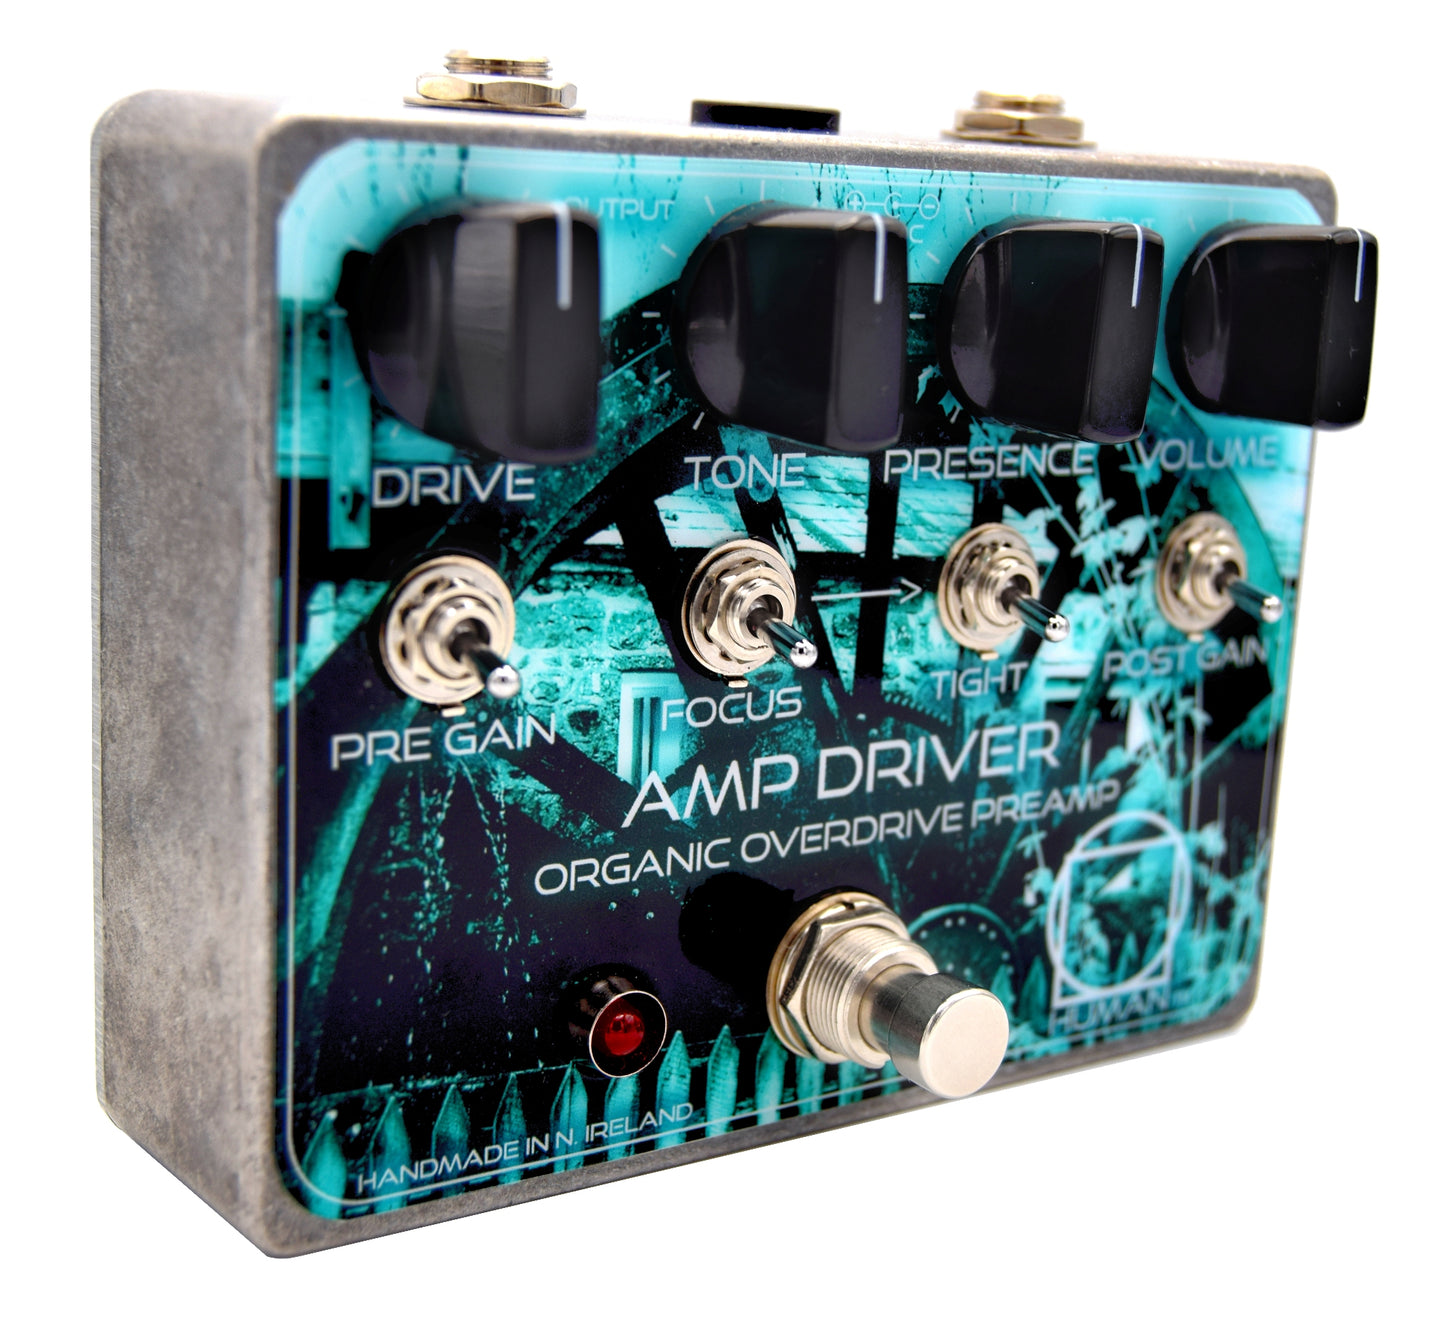 Human Amp Driver | Organic Overdrive Preamp + Distortion Pedal